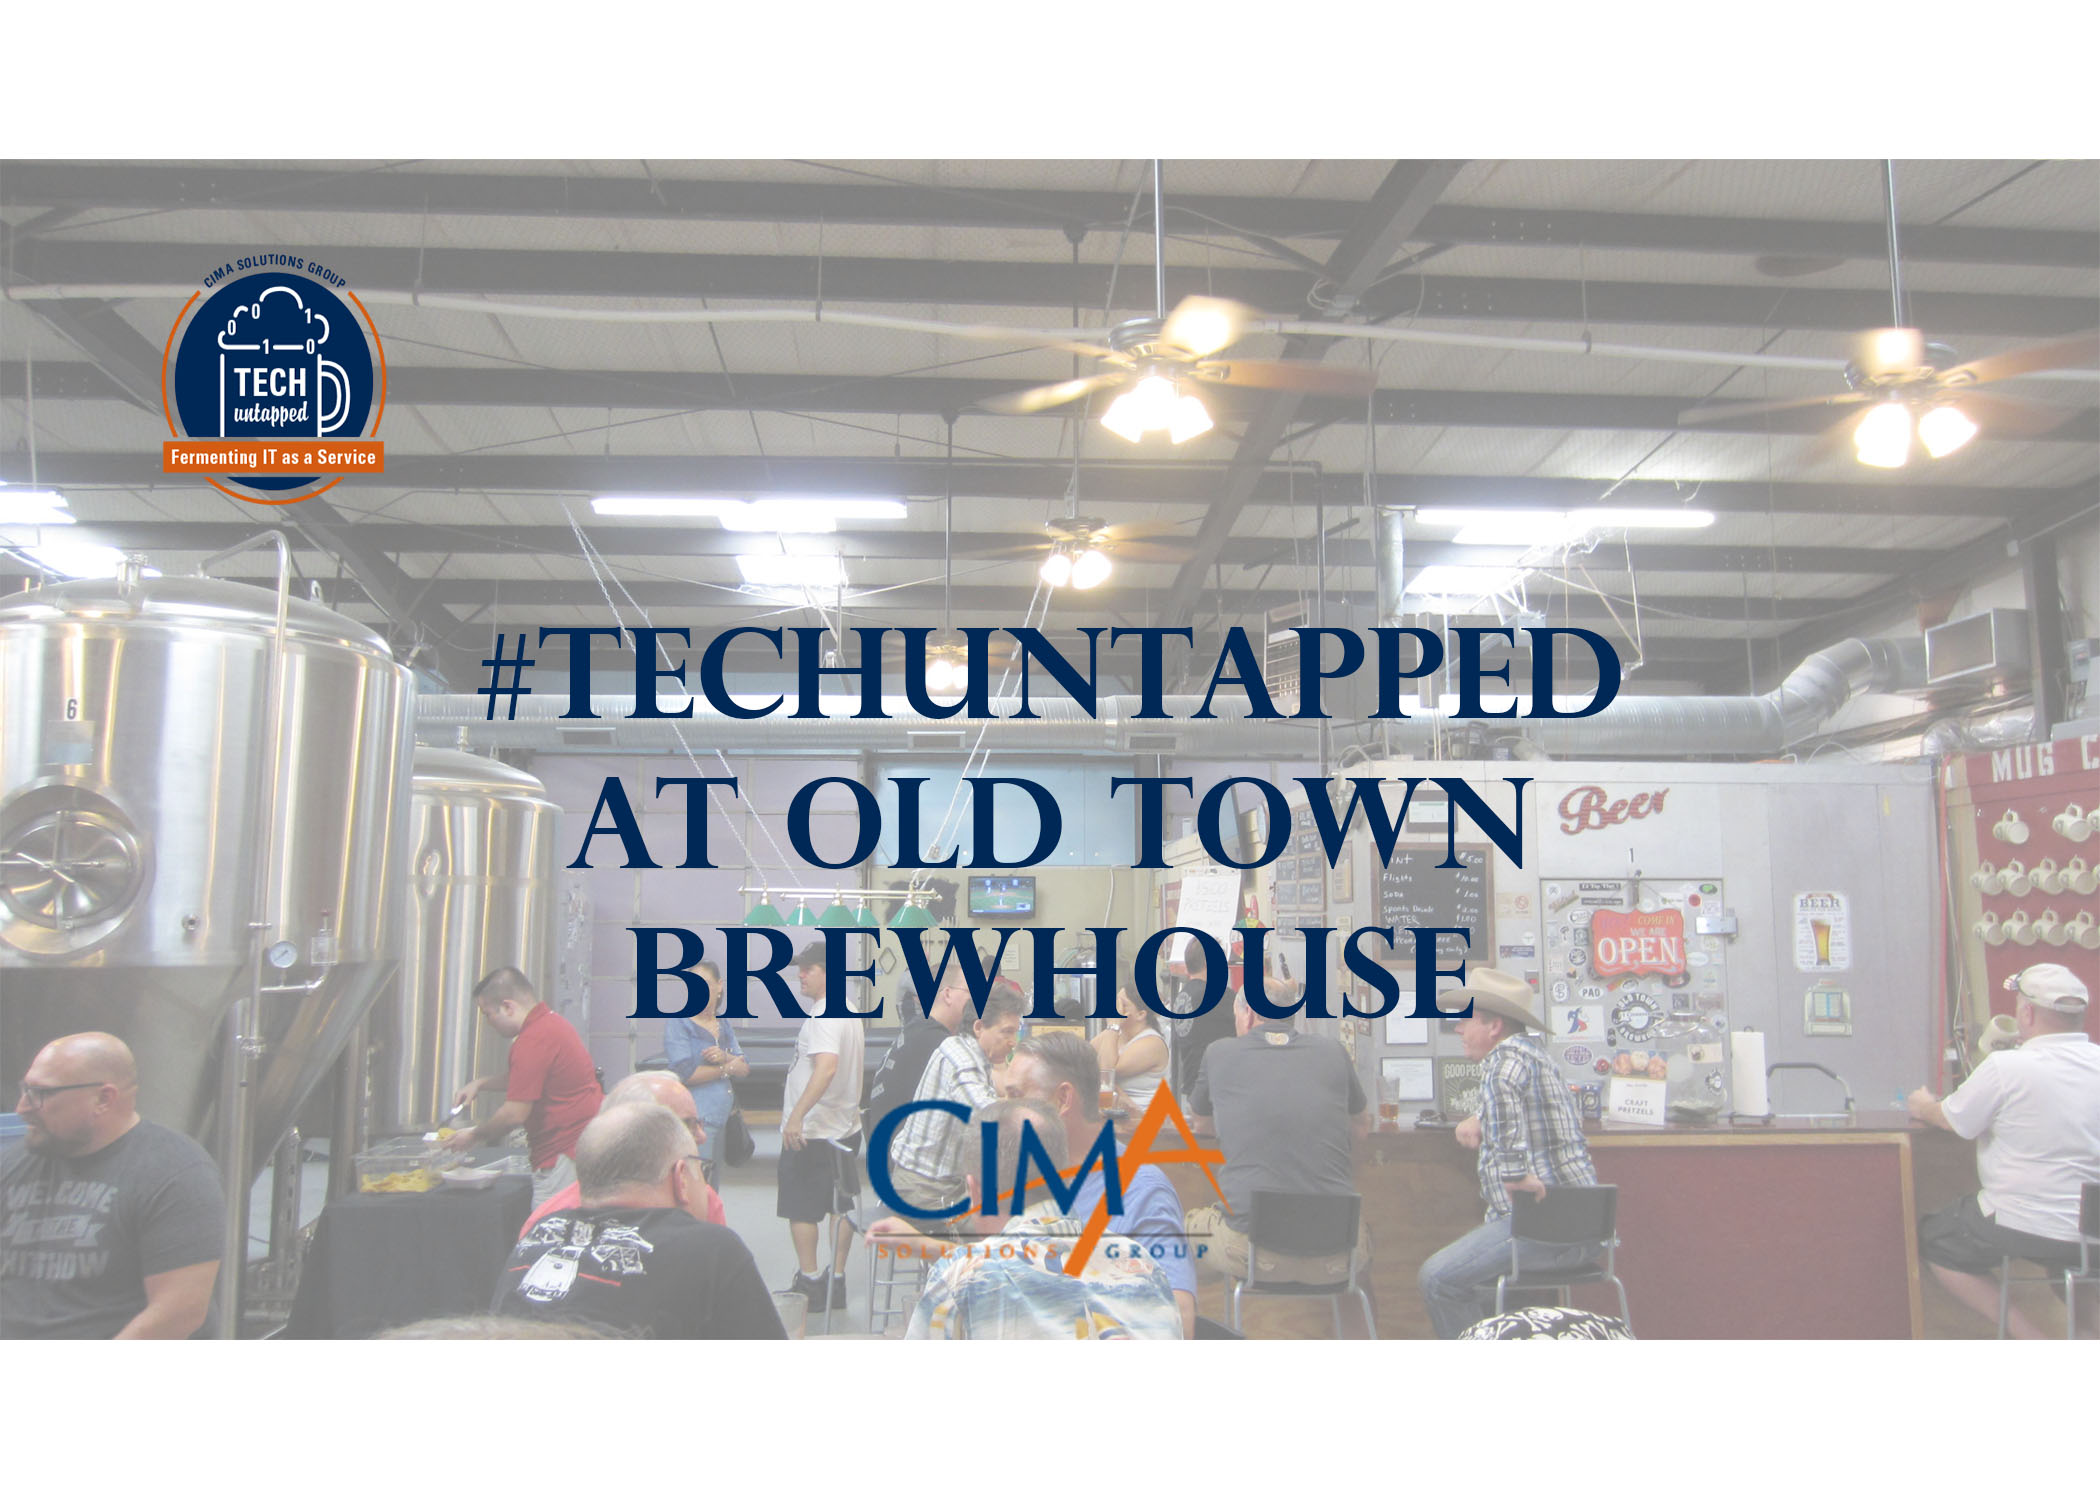 TechUntapped with Cima at Old Town Brewhouse